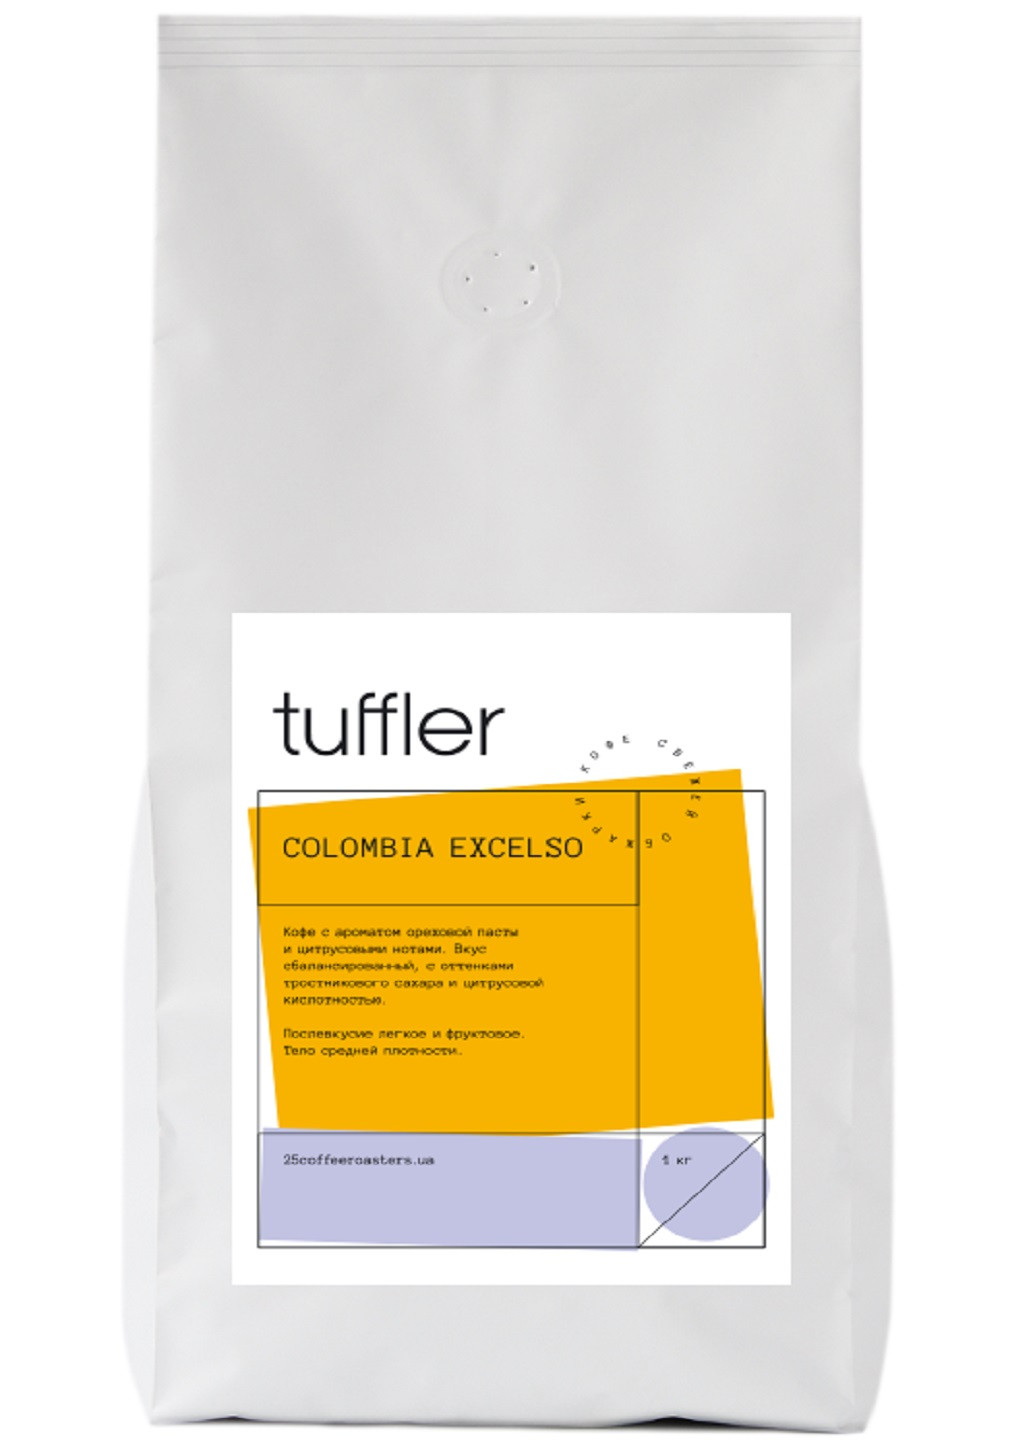 Кофе в зернах арабика COLOMBIA EXCELSO, 1 кг 25 Coffee Roasters (218281426)